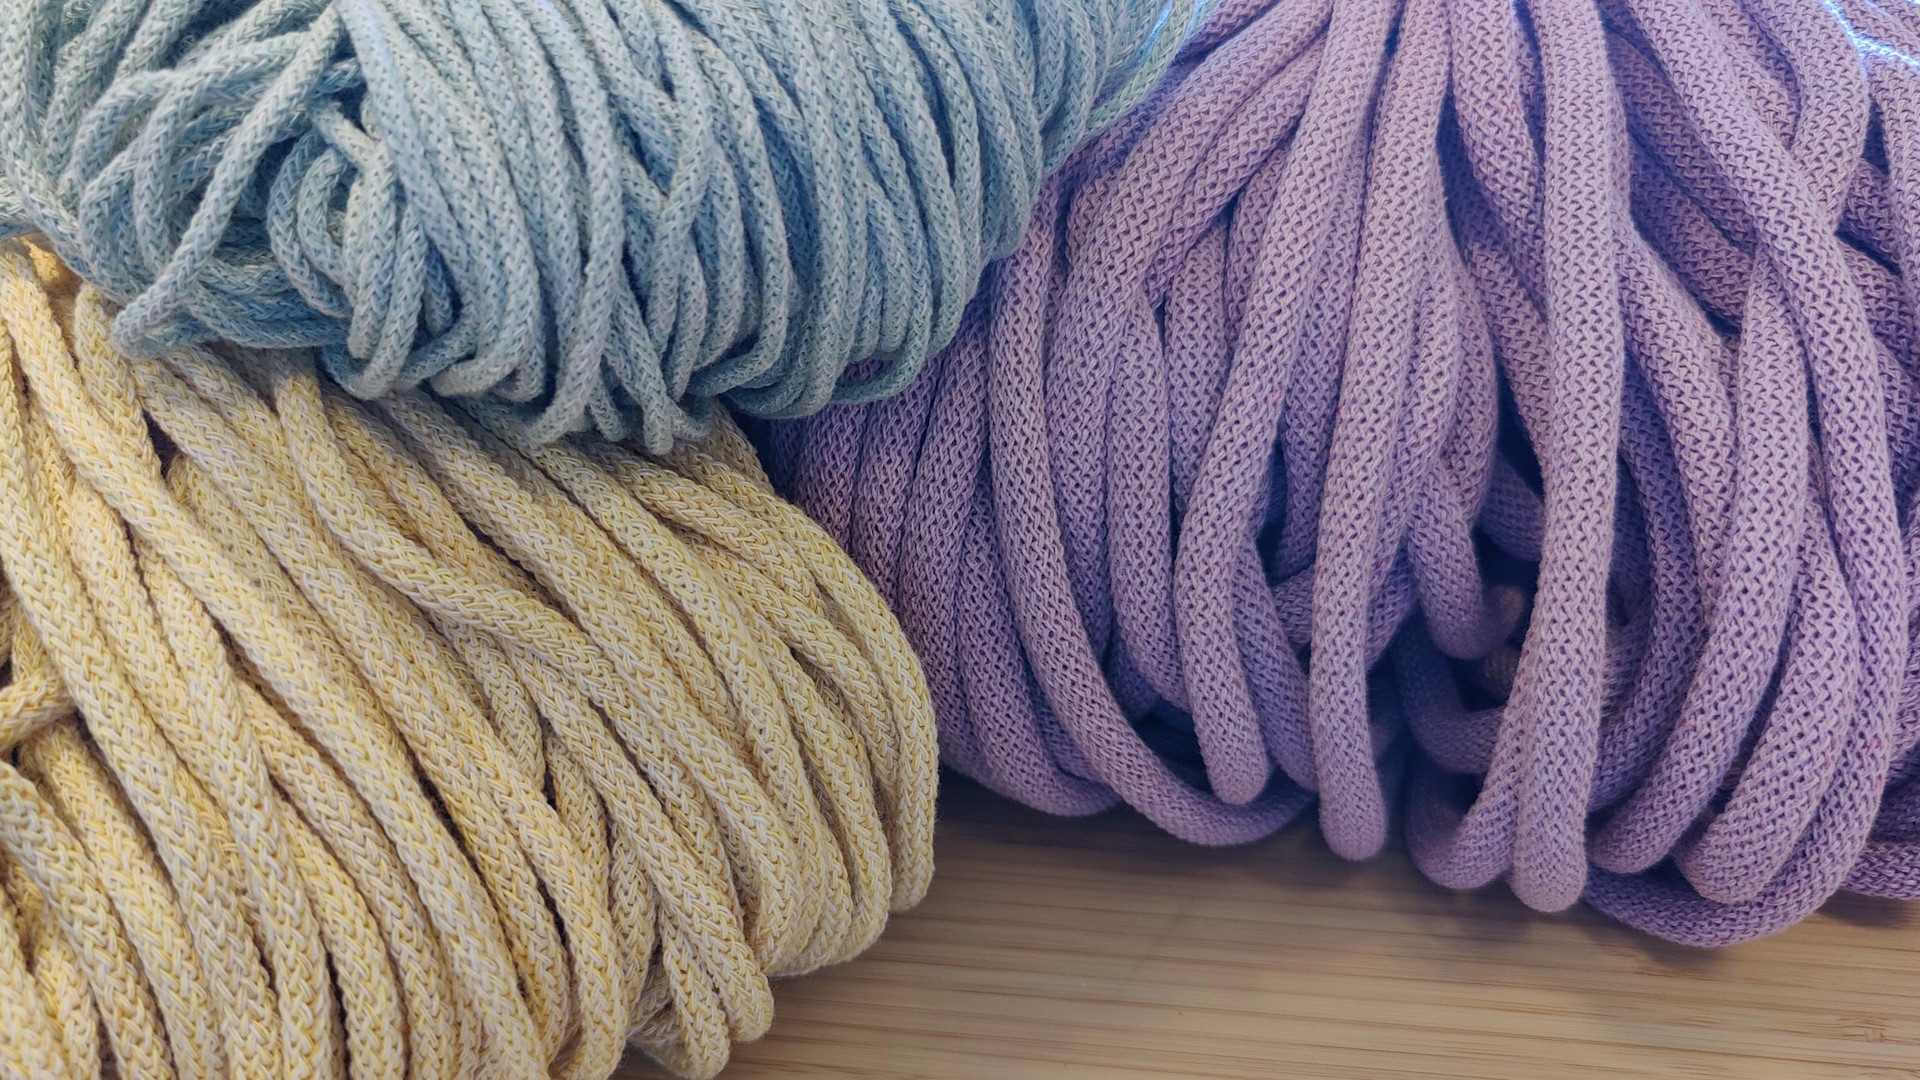 Essential macrame supplies: What and where to buy